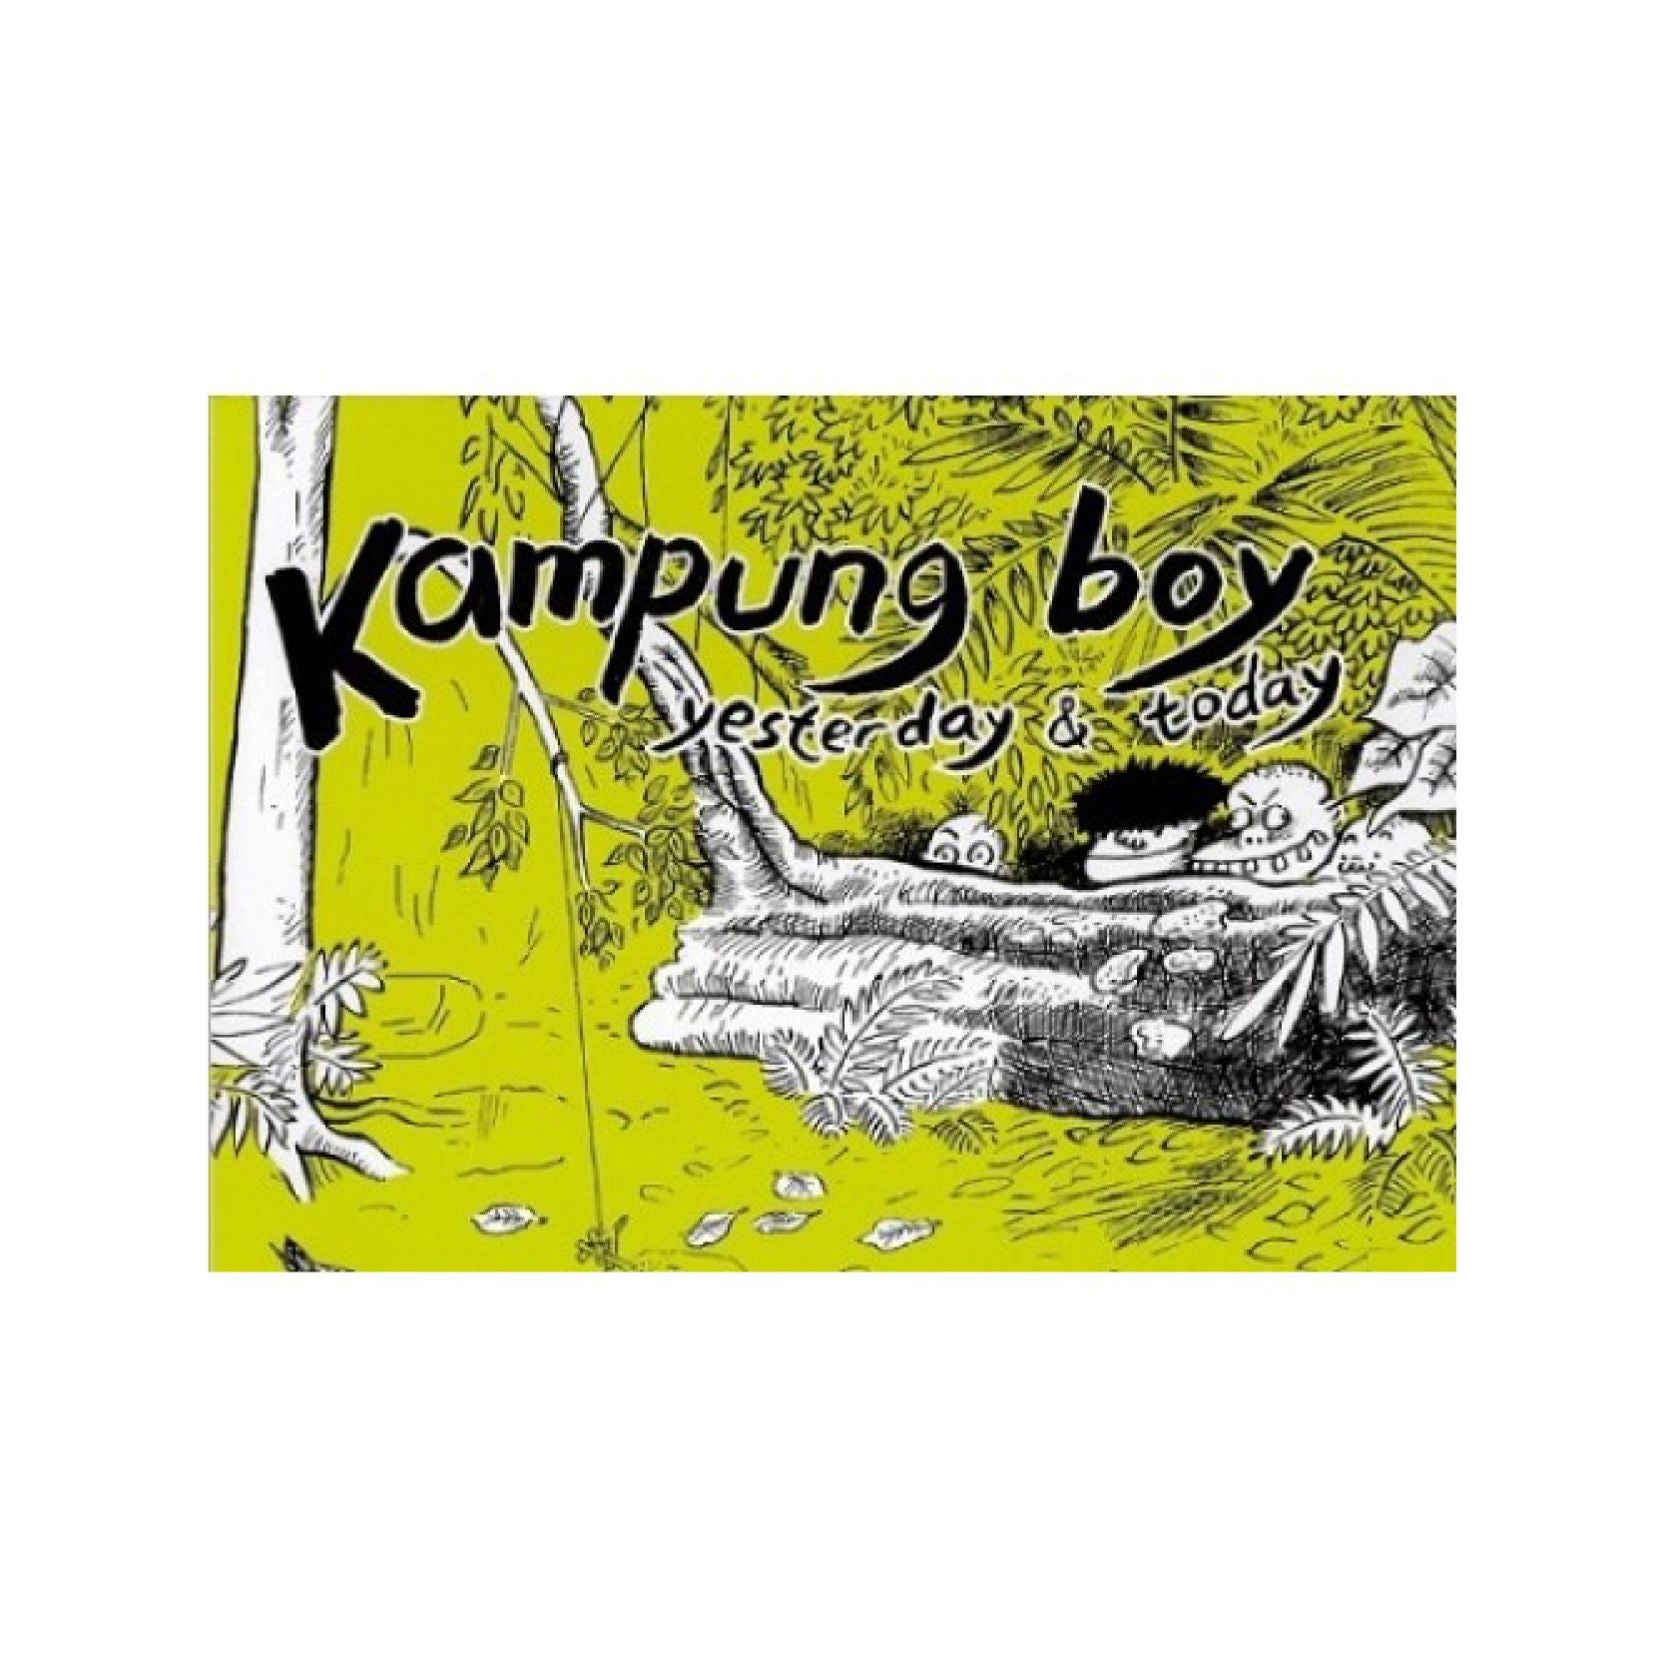 THE KAMPUNG BOY: YESTERDAY AND TODAY by Lat Default Title